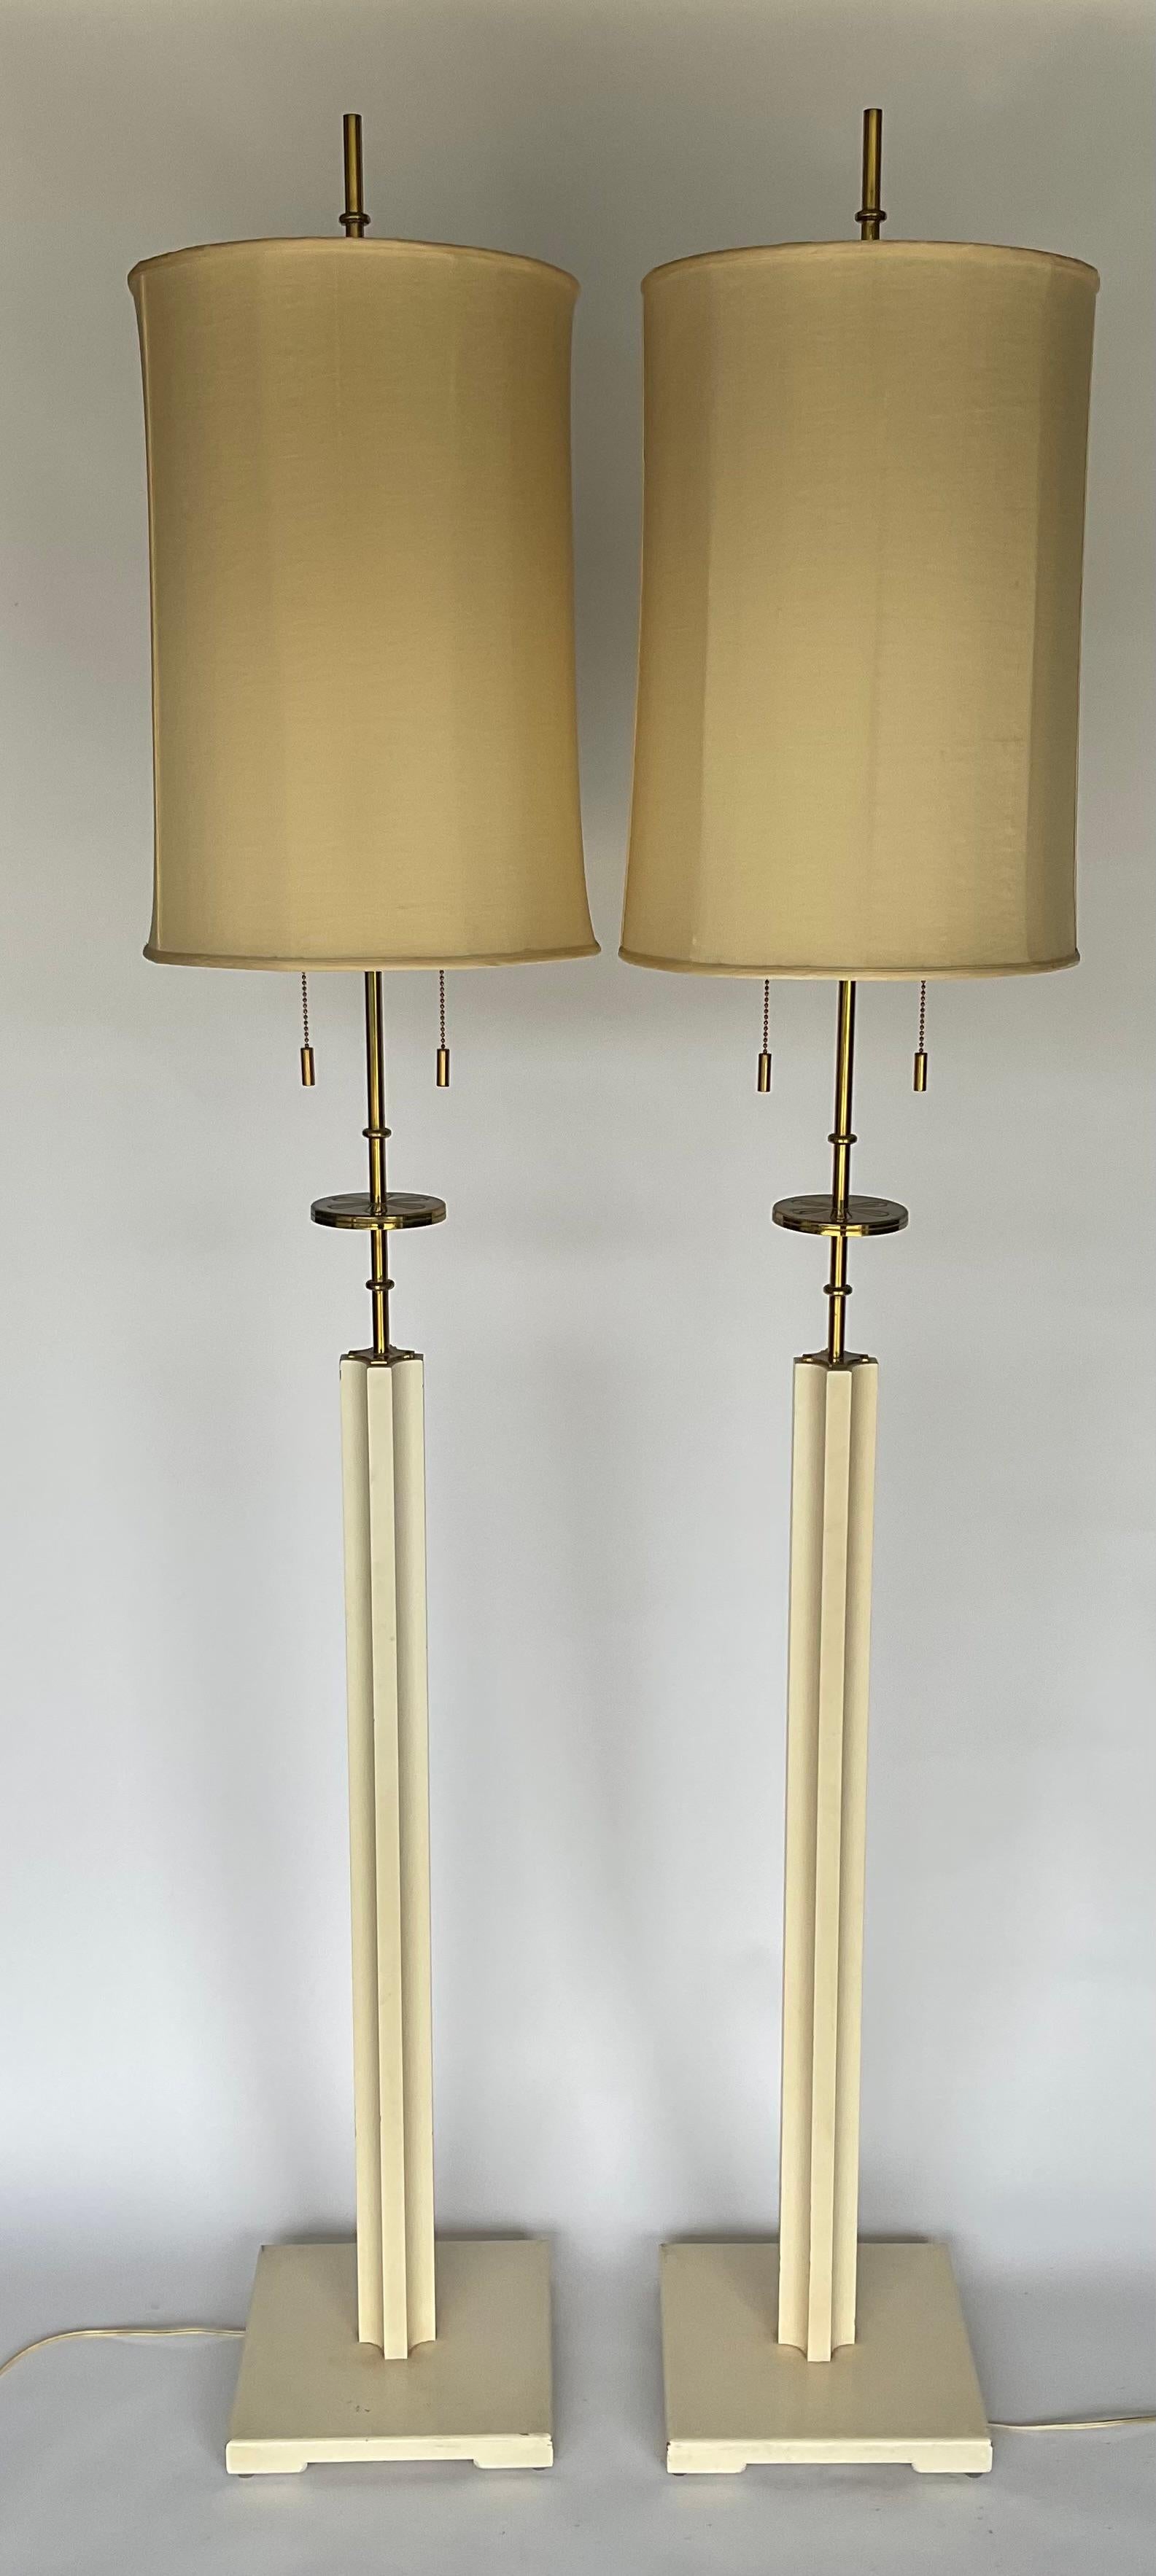 Rare PAIR Tommi Parzinger Model 6362 Floor Lamps Original finish and shades  For Sale 3